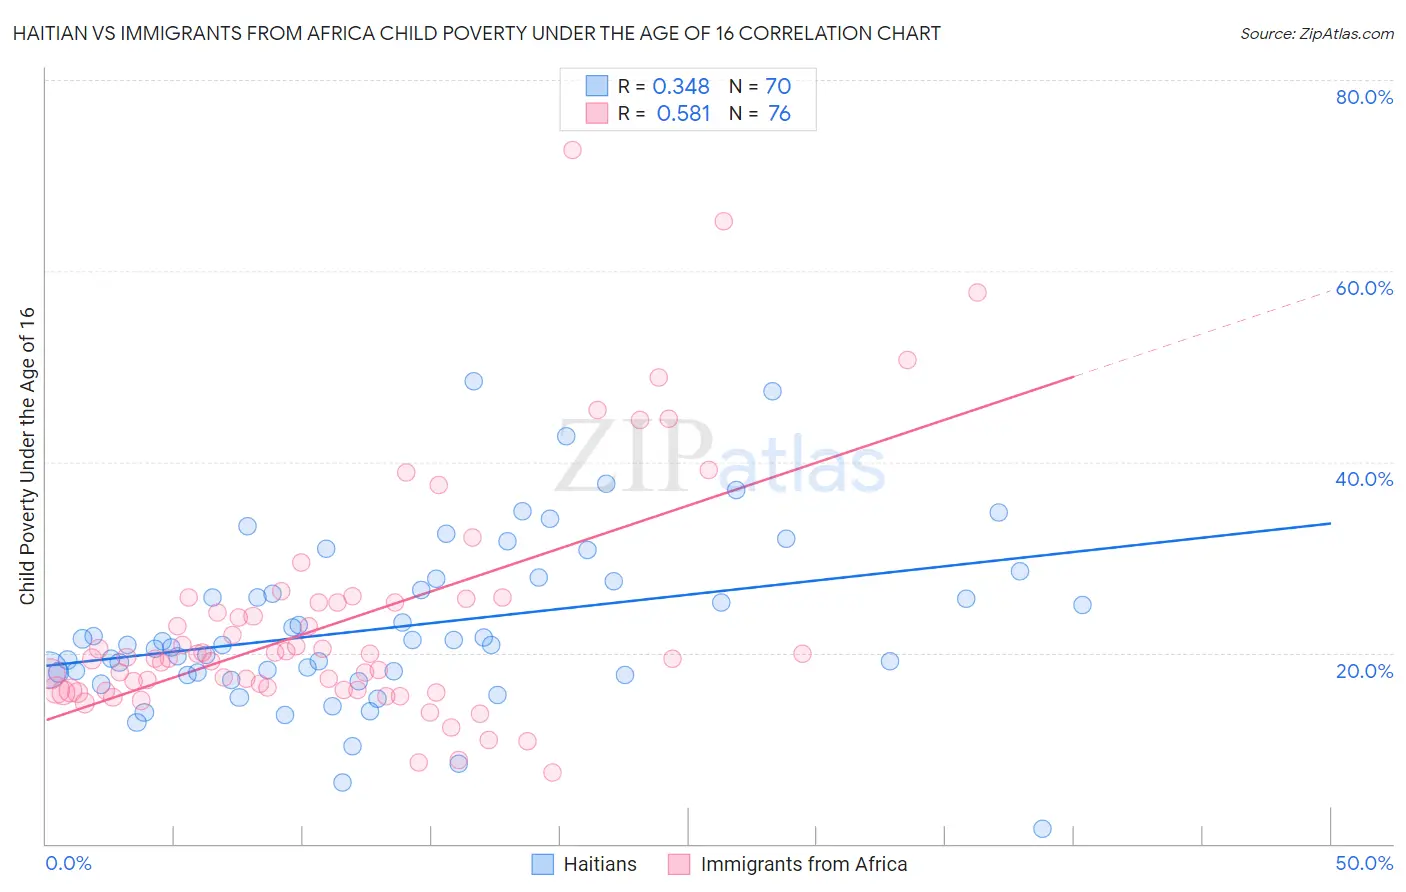 Haitian vs Immigrants from Africa Child Poverty Under the Age of 16